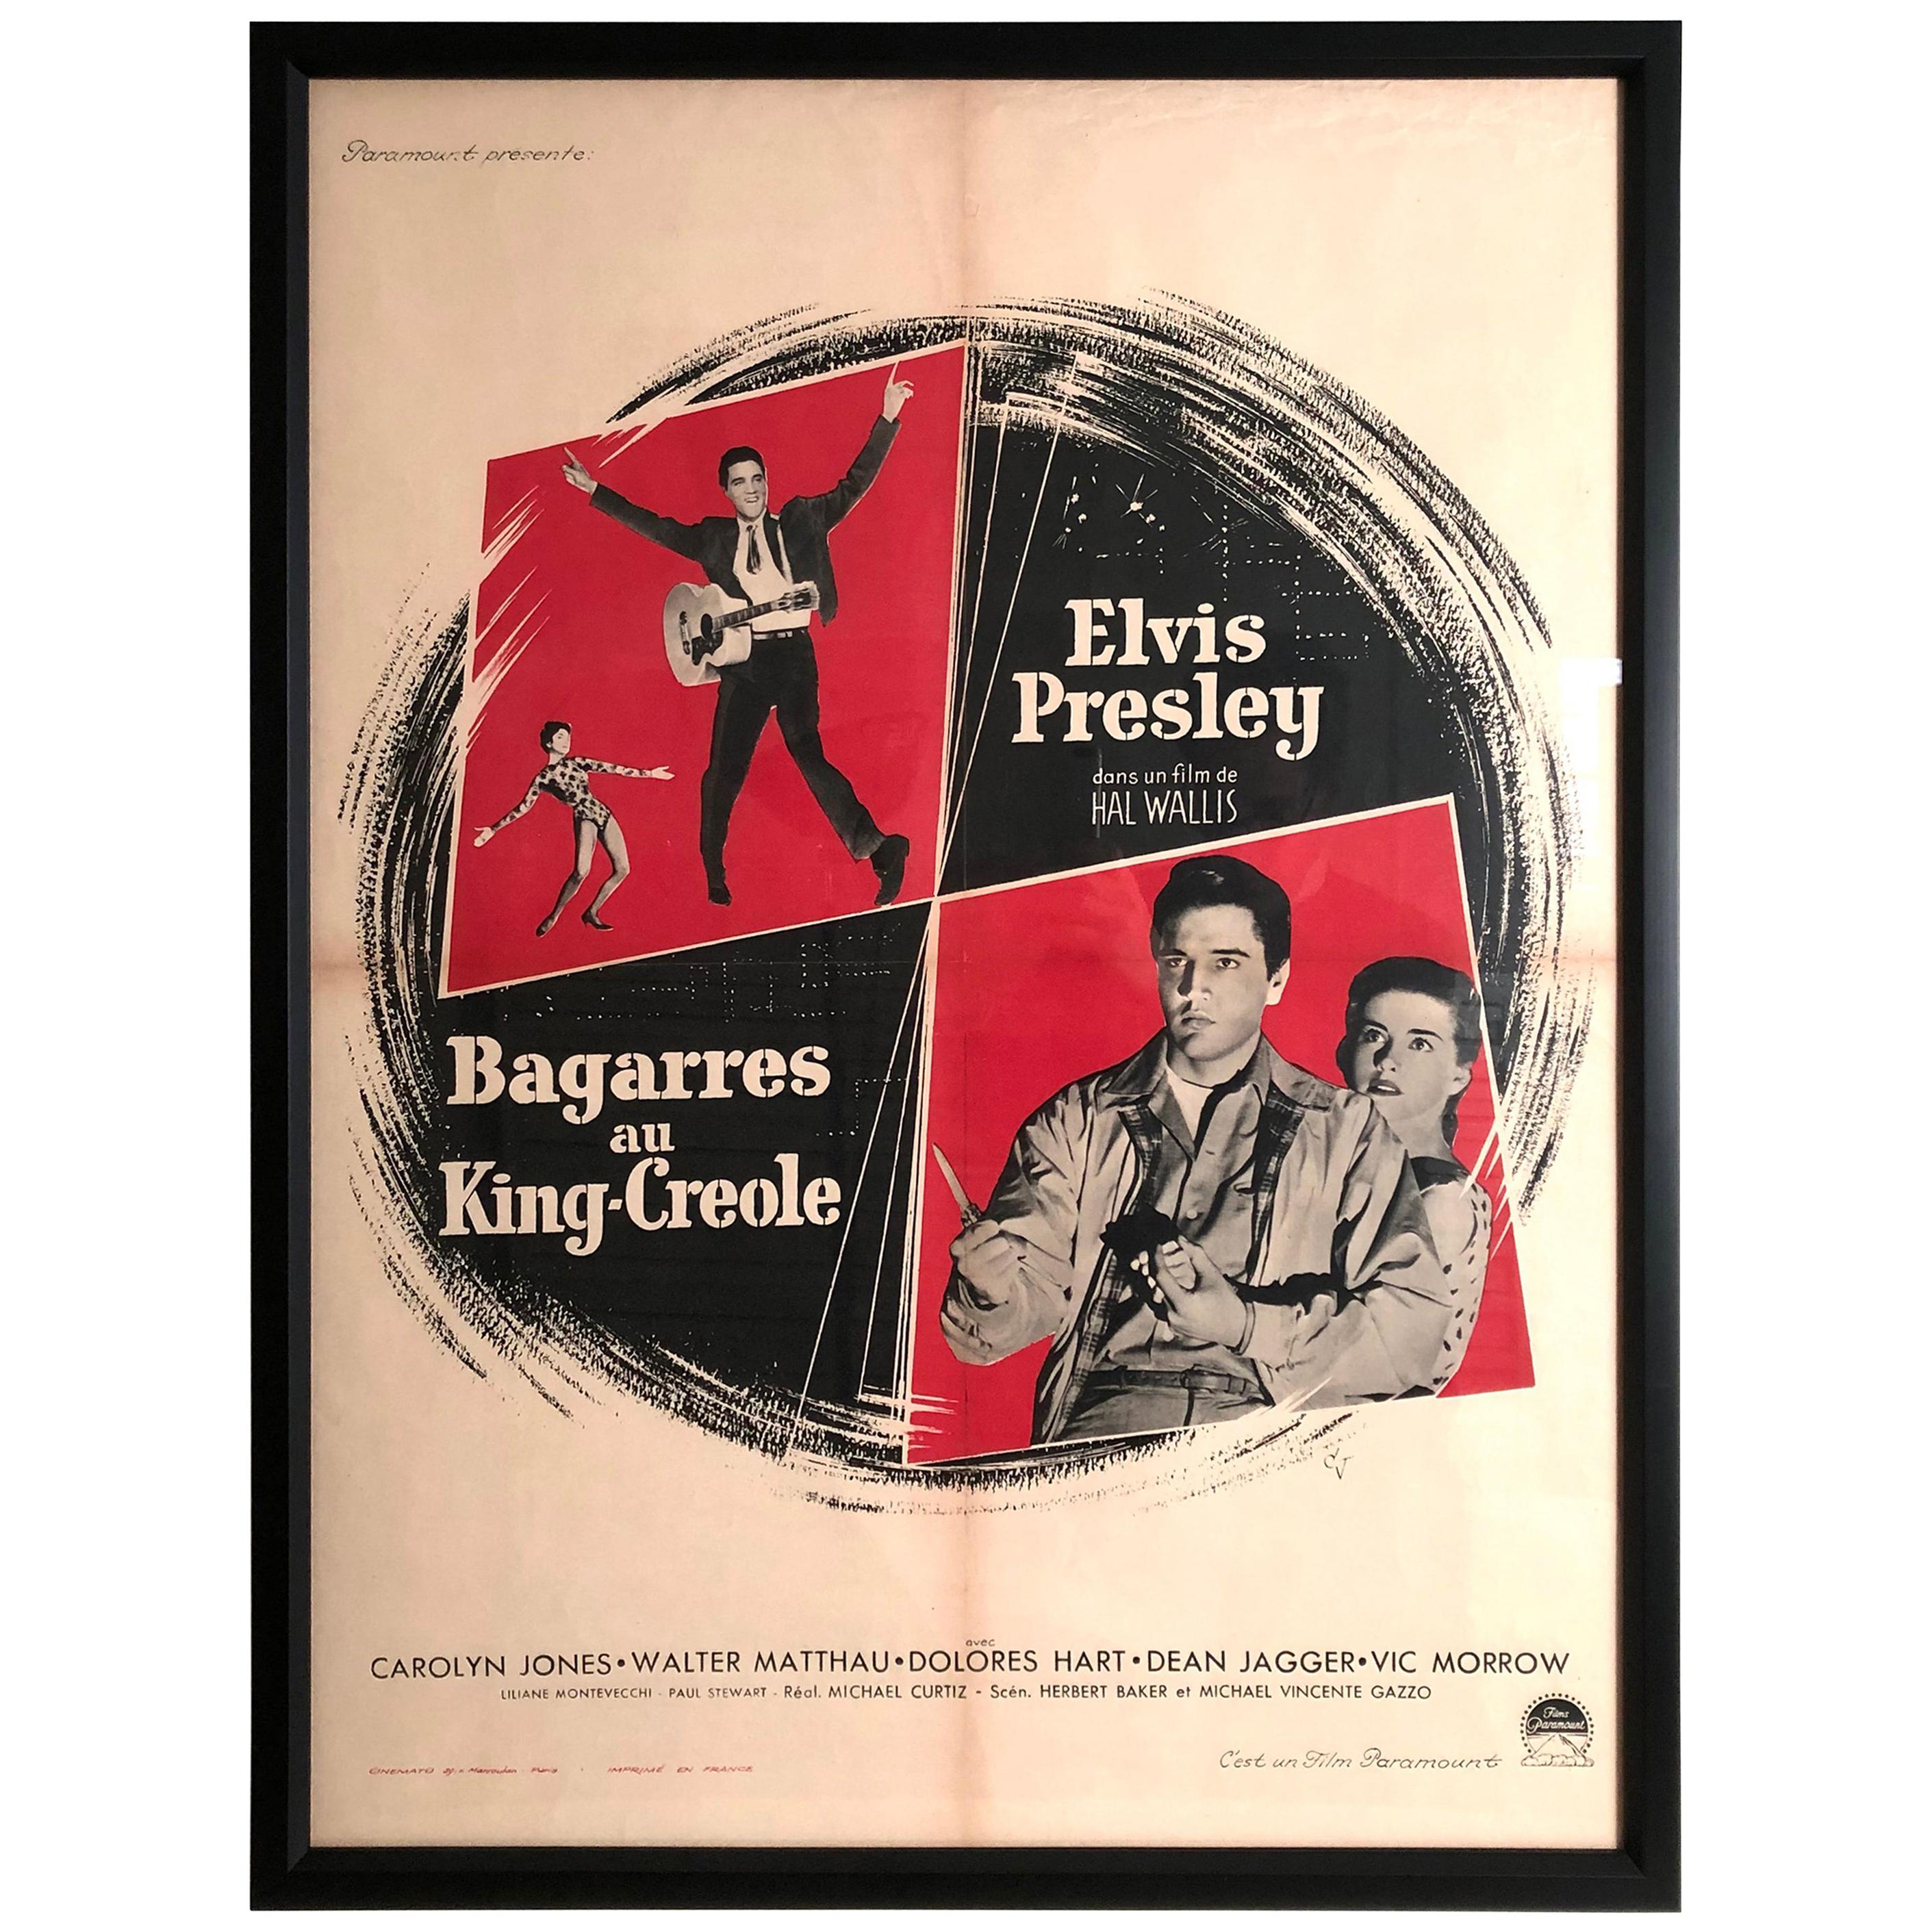 Original Elvis Presley French Movie Poster for King Creole, circa 1958